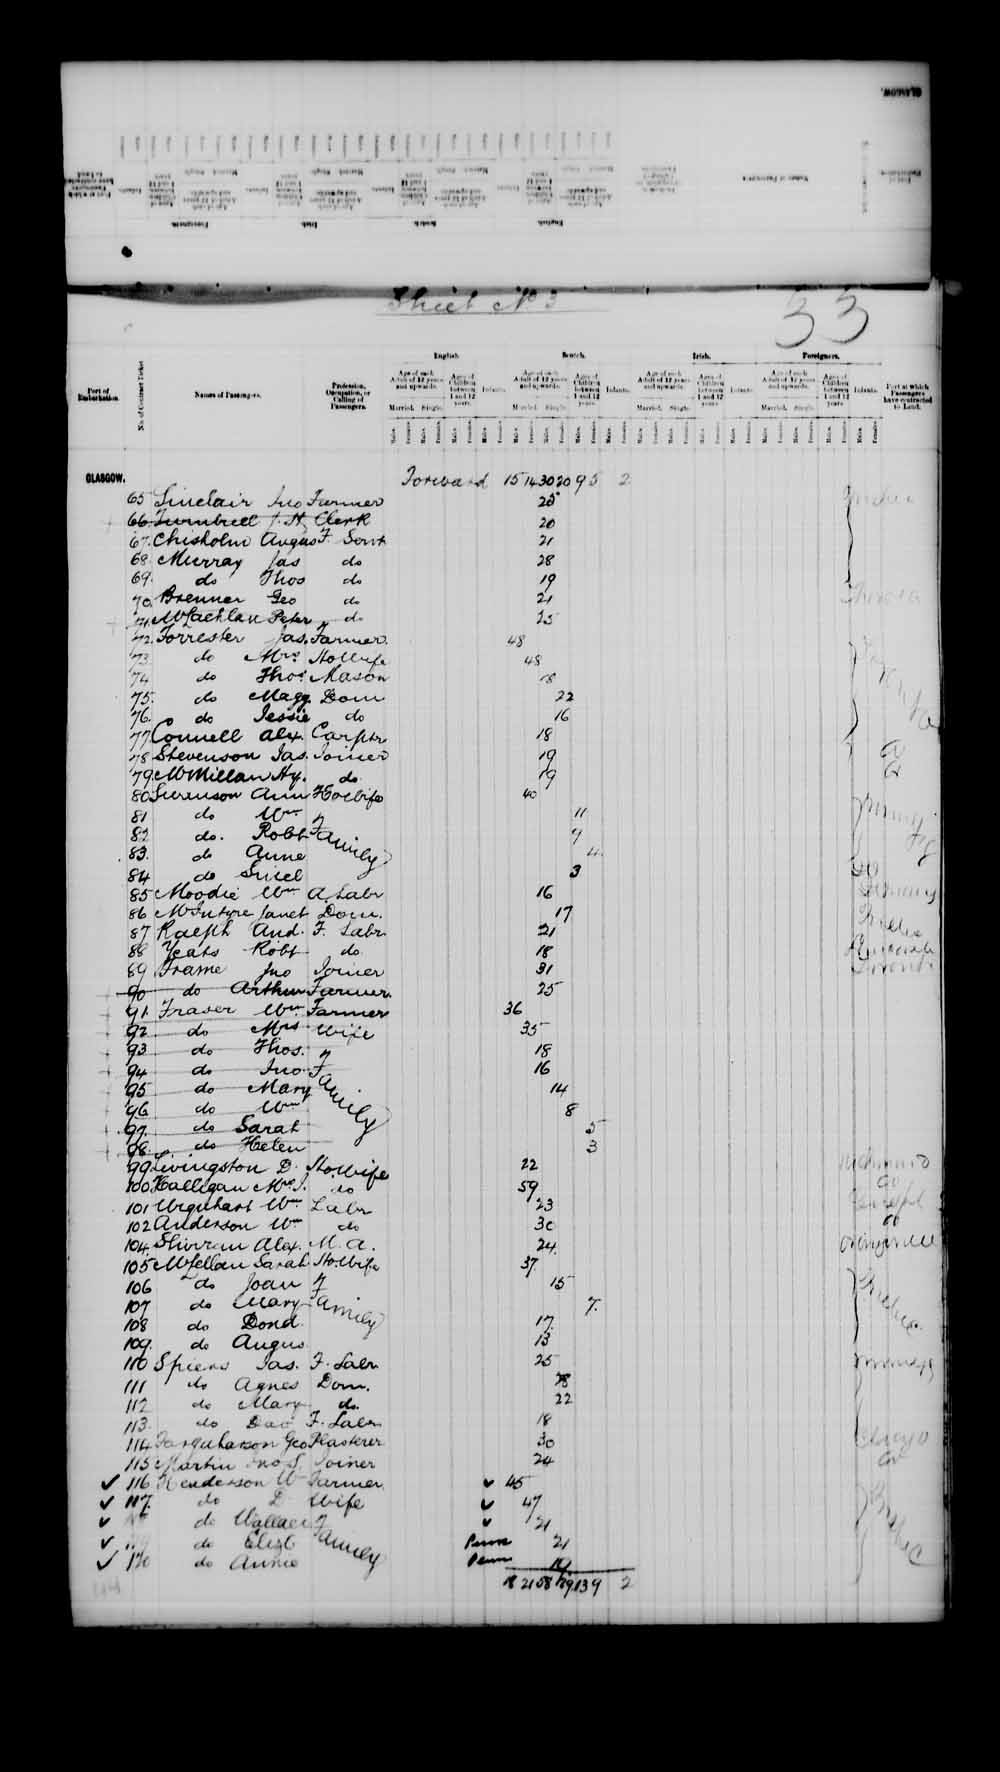 Digitized page of Passenger Lists for Image No.: e003543091